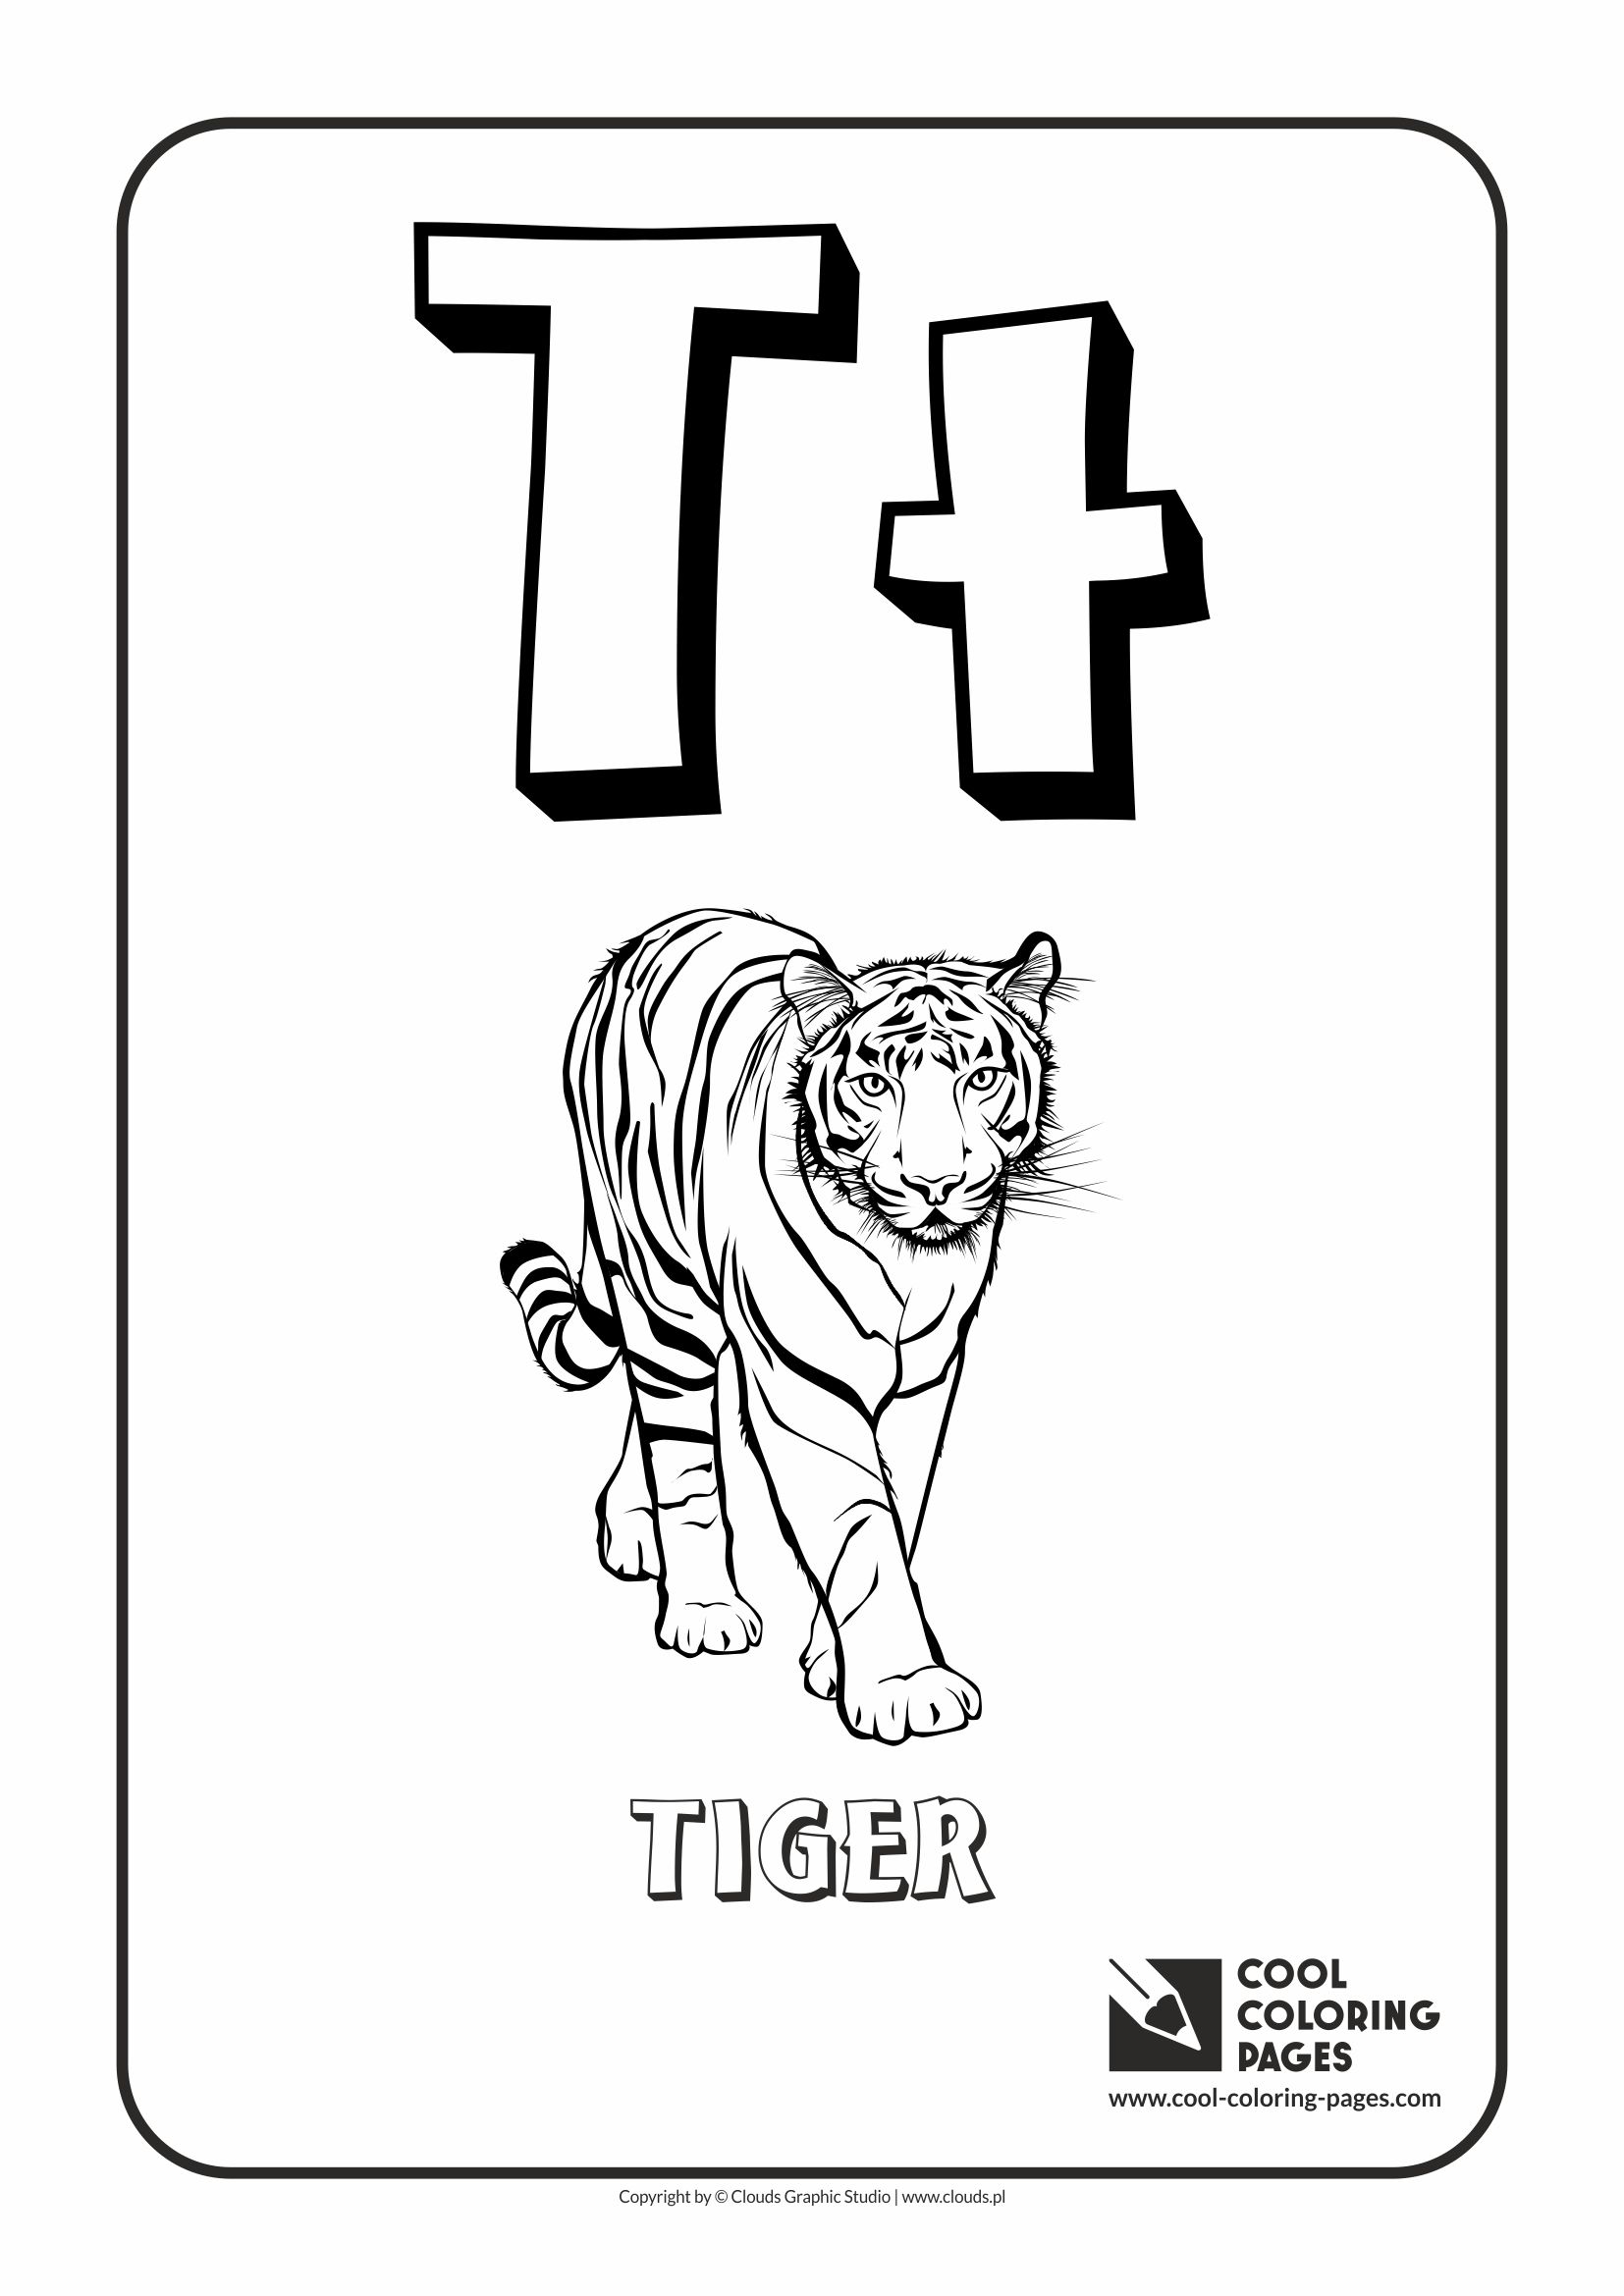 cool-coloring-pages-alphabet-coloring-pages-cool-coloring-pages